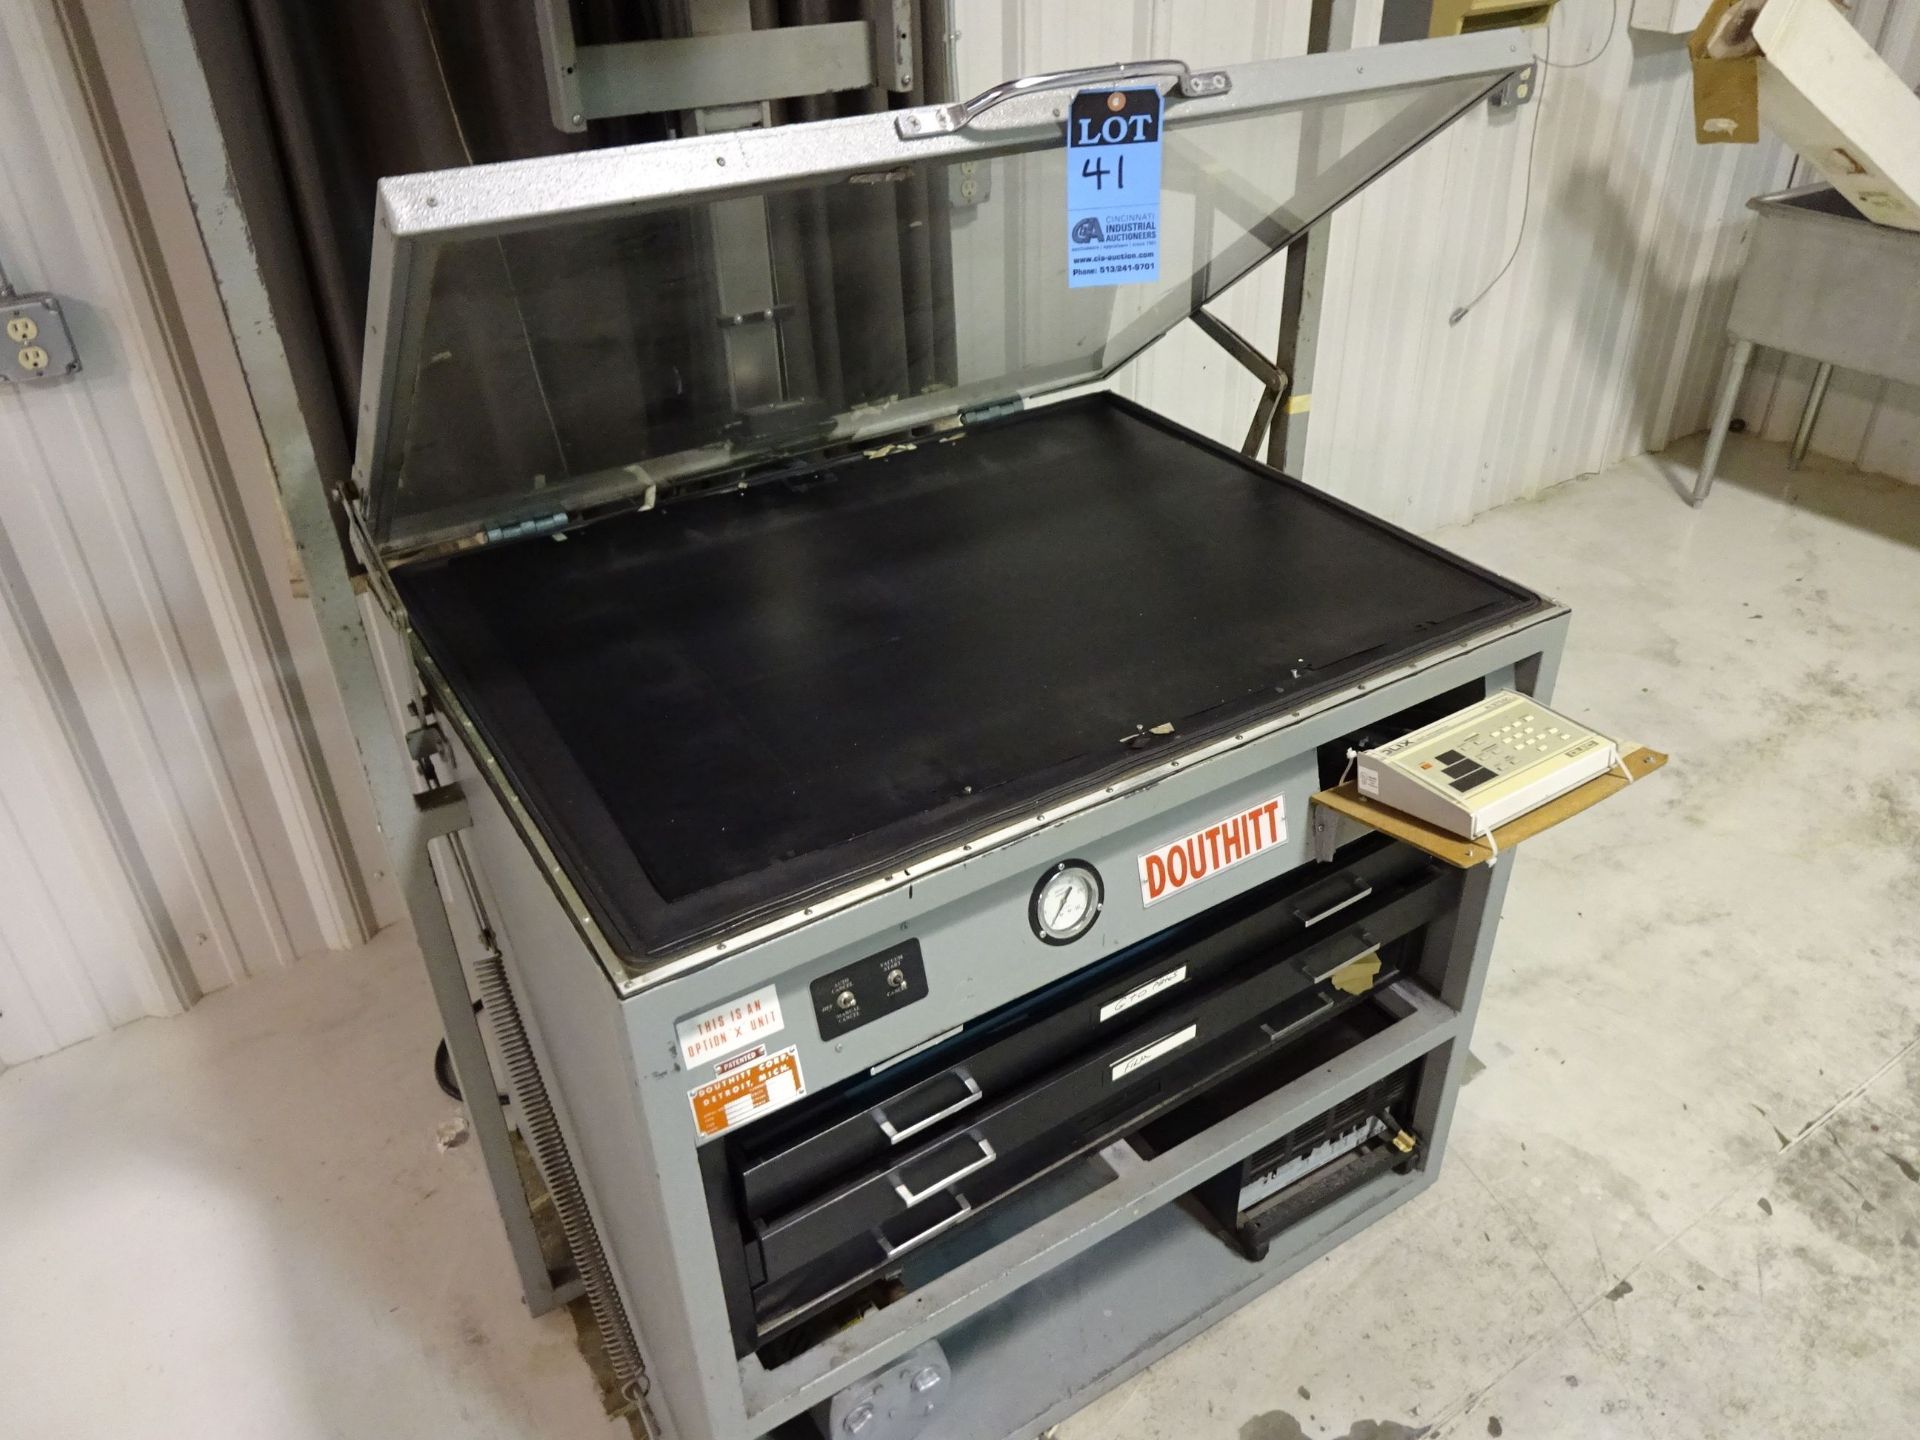 30" X 40" DOUTHITT TYPE DCOP CONSOLE OVERHEAD PLATEMAKER; S/N 67772, WITH OLITE AL53 TRI-LEVEL - Image 5 of 8